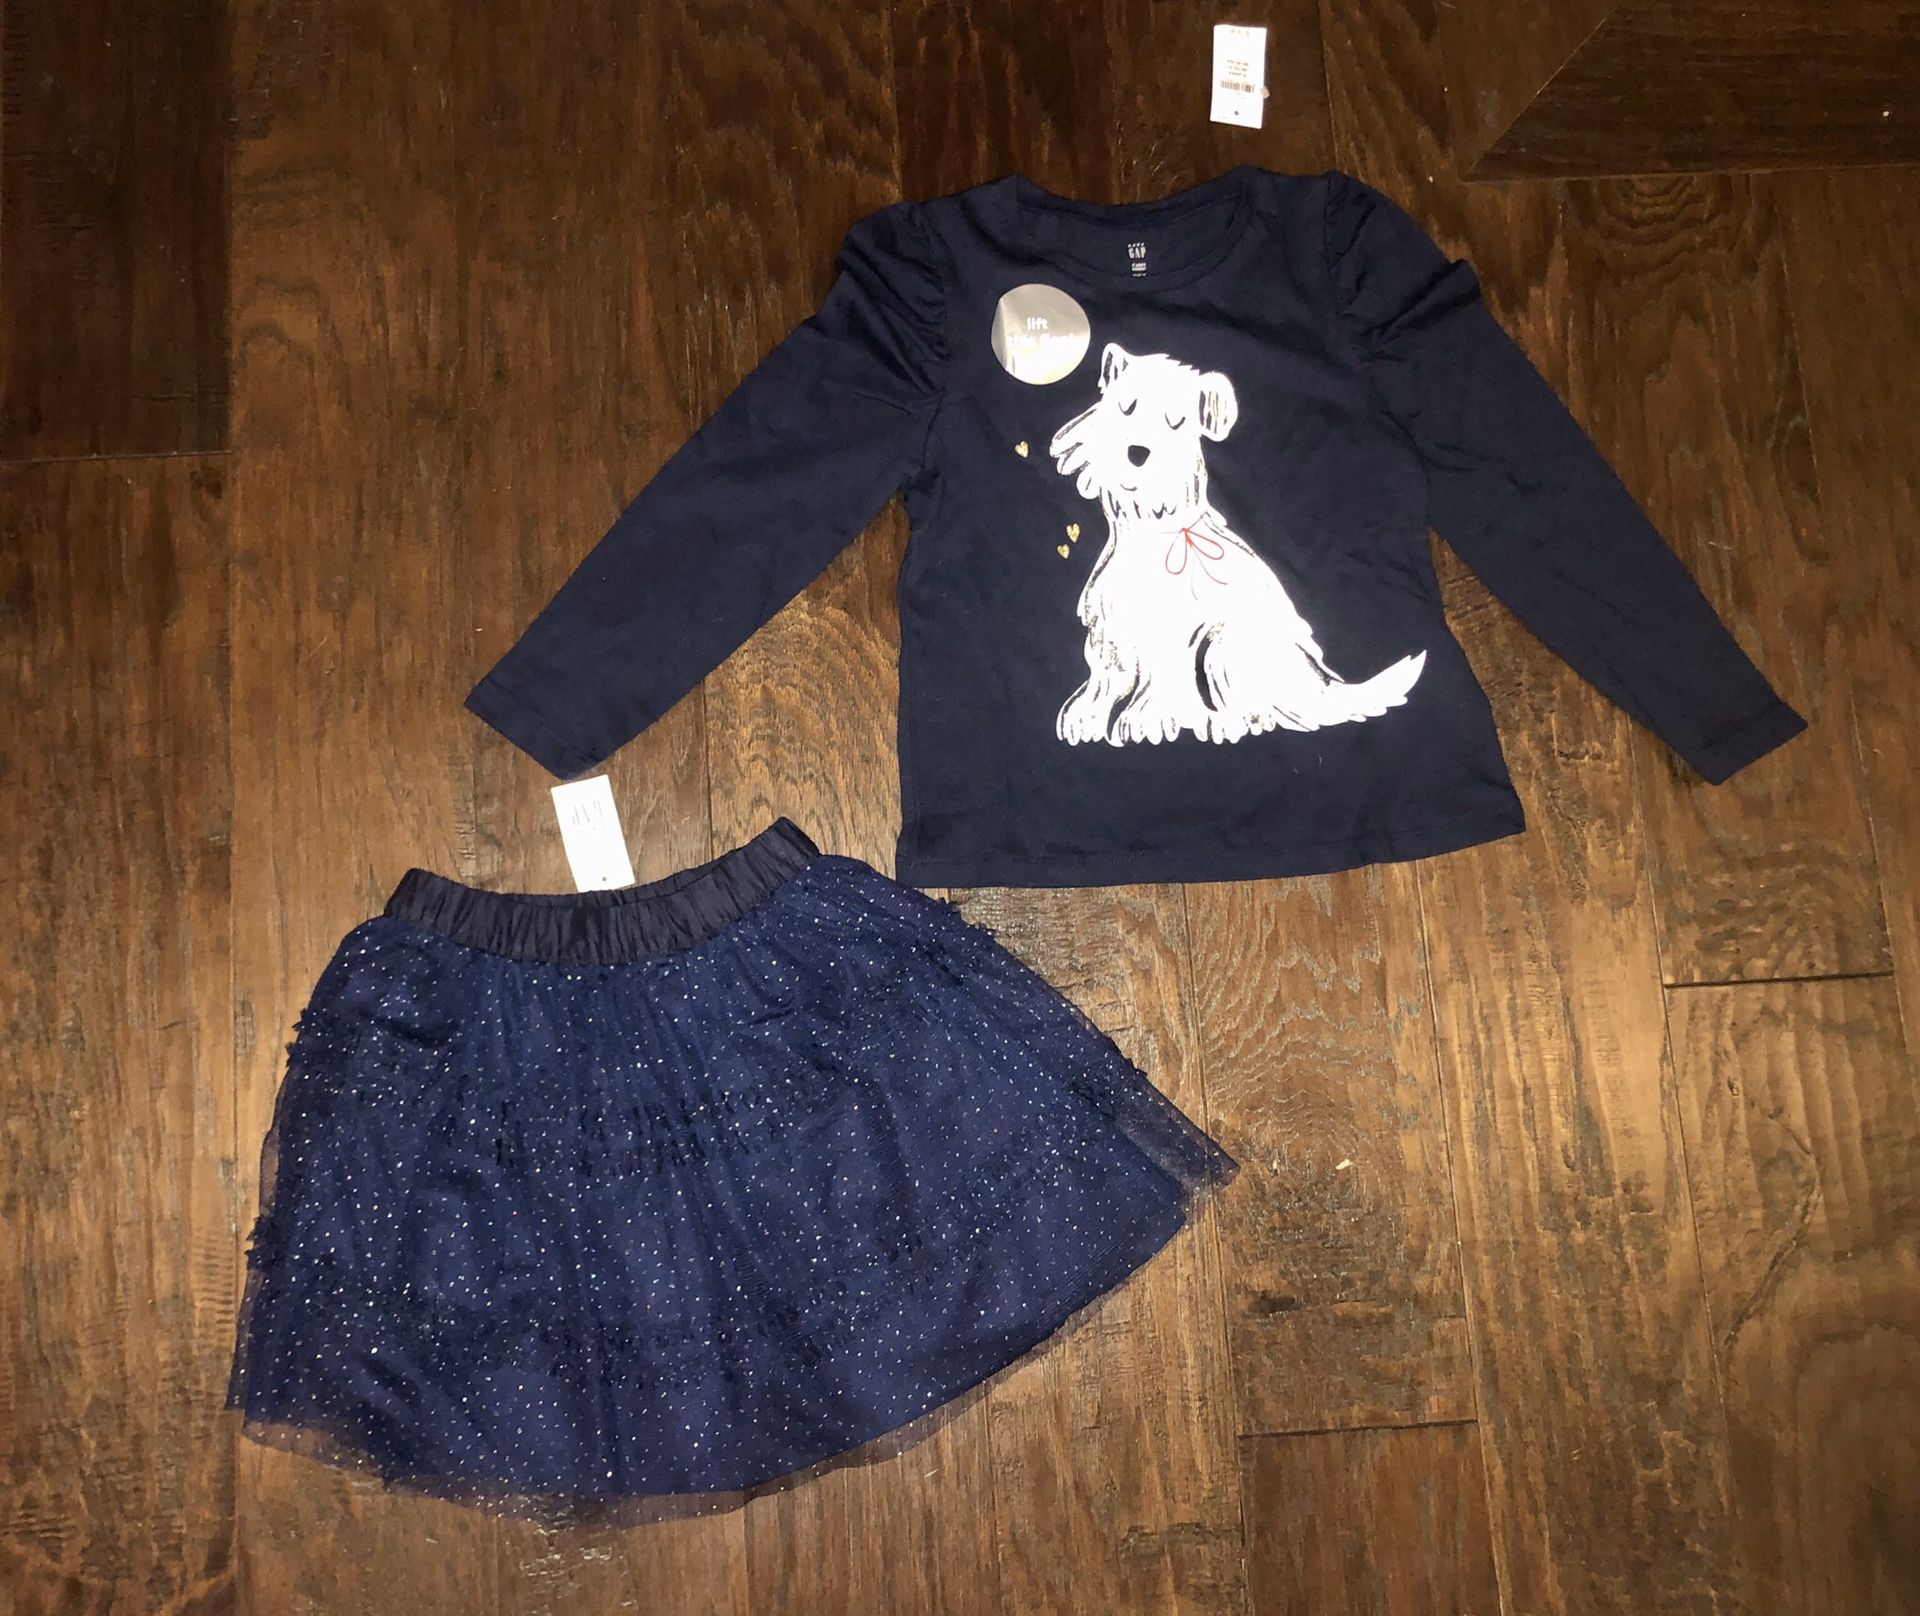 New With tags Baby GAP Tulle skirt and tee 4T